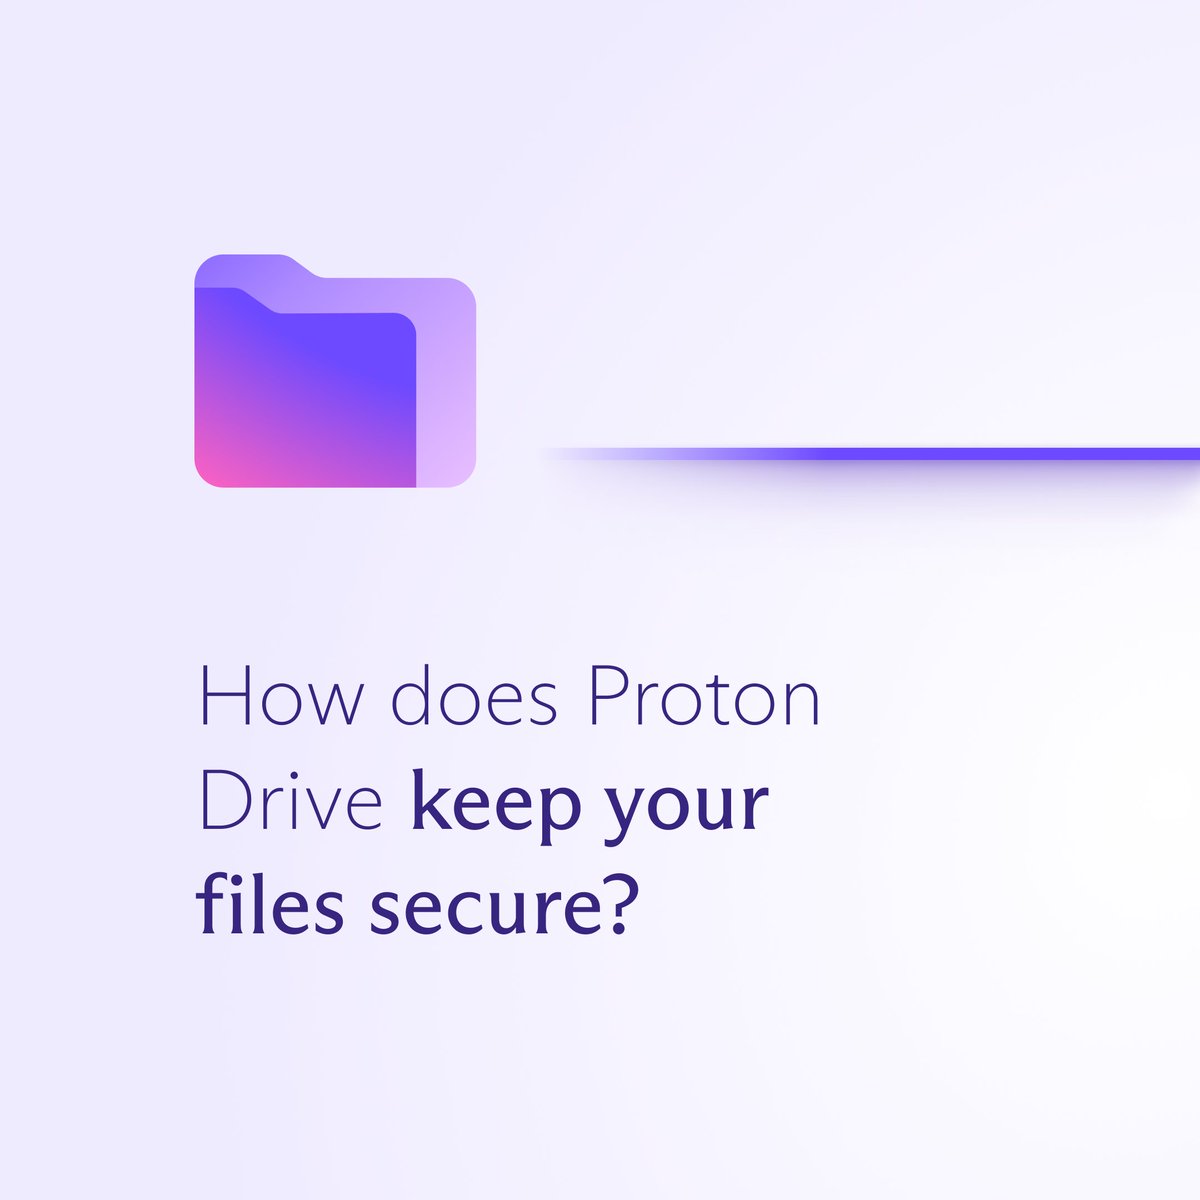 Proton Drive on Twitter: "At Proton Drive, our priority is to keep your